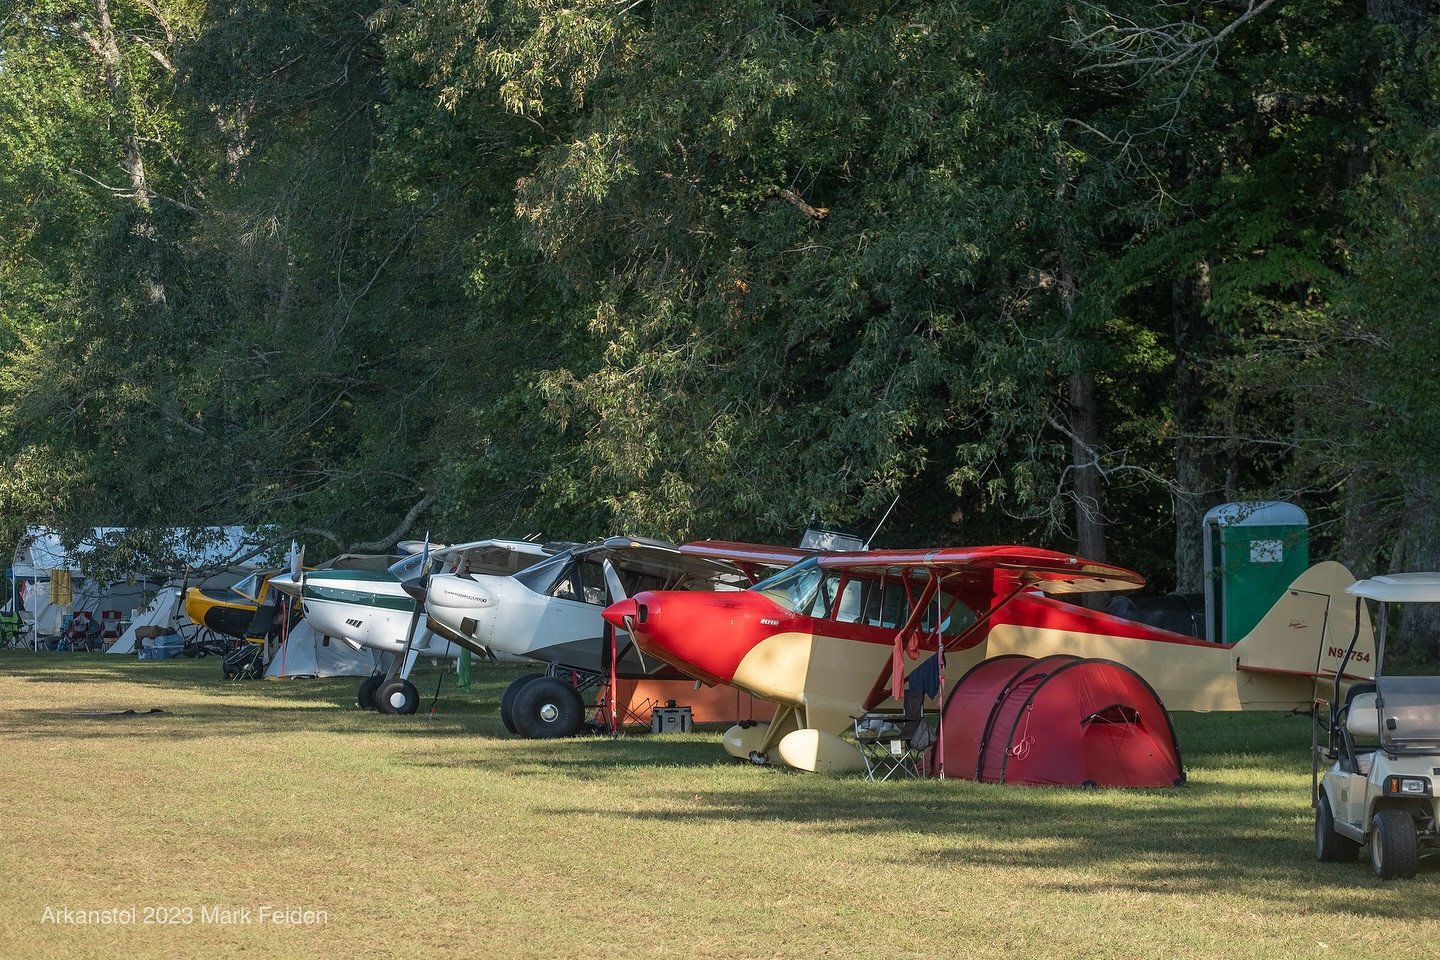 ArkanSTOL at Byrd's Adventure Center is a destination event with pilots flying in from all and camping underwing Photo by Mark Feiden